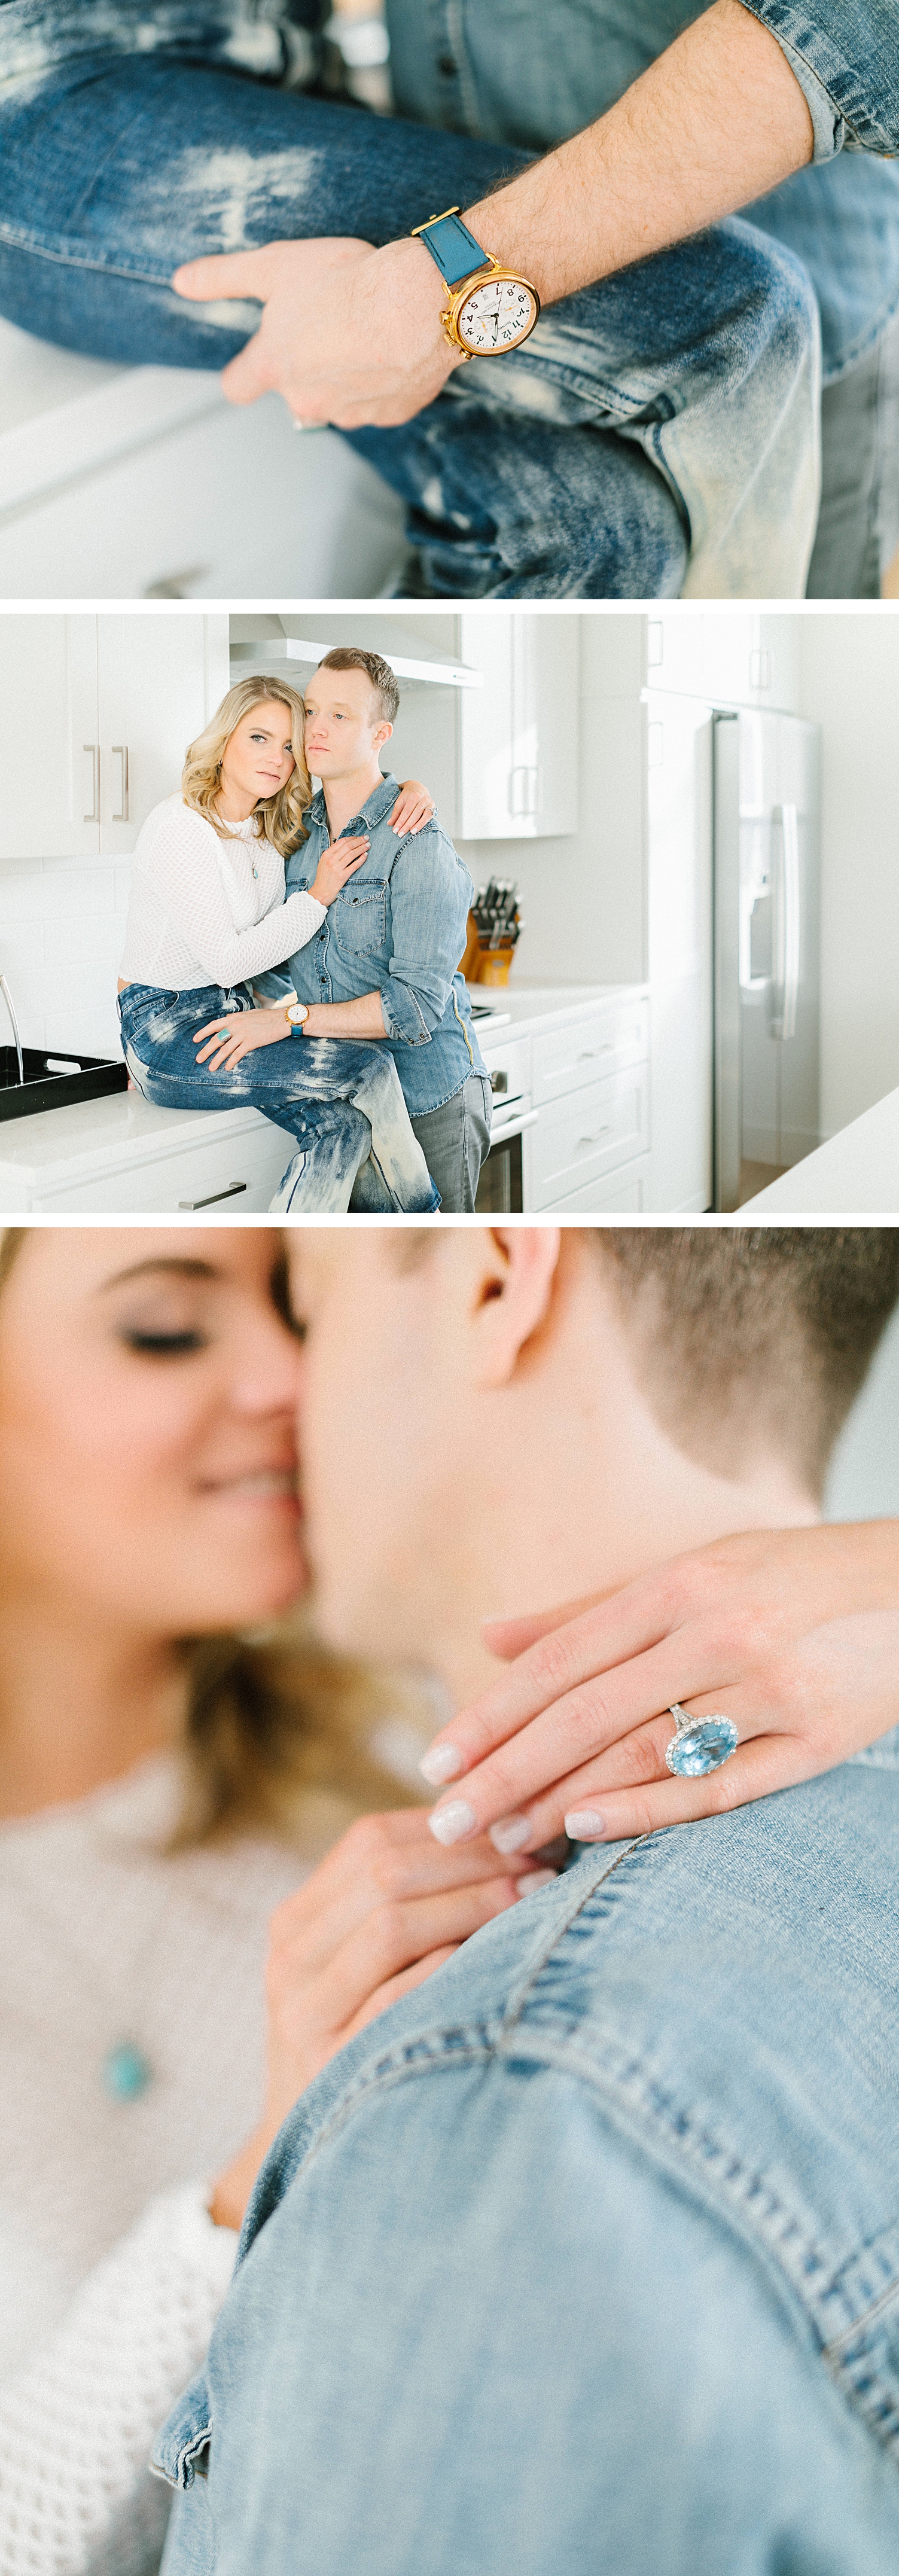 Turquoise jewelry engagement ring